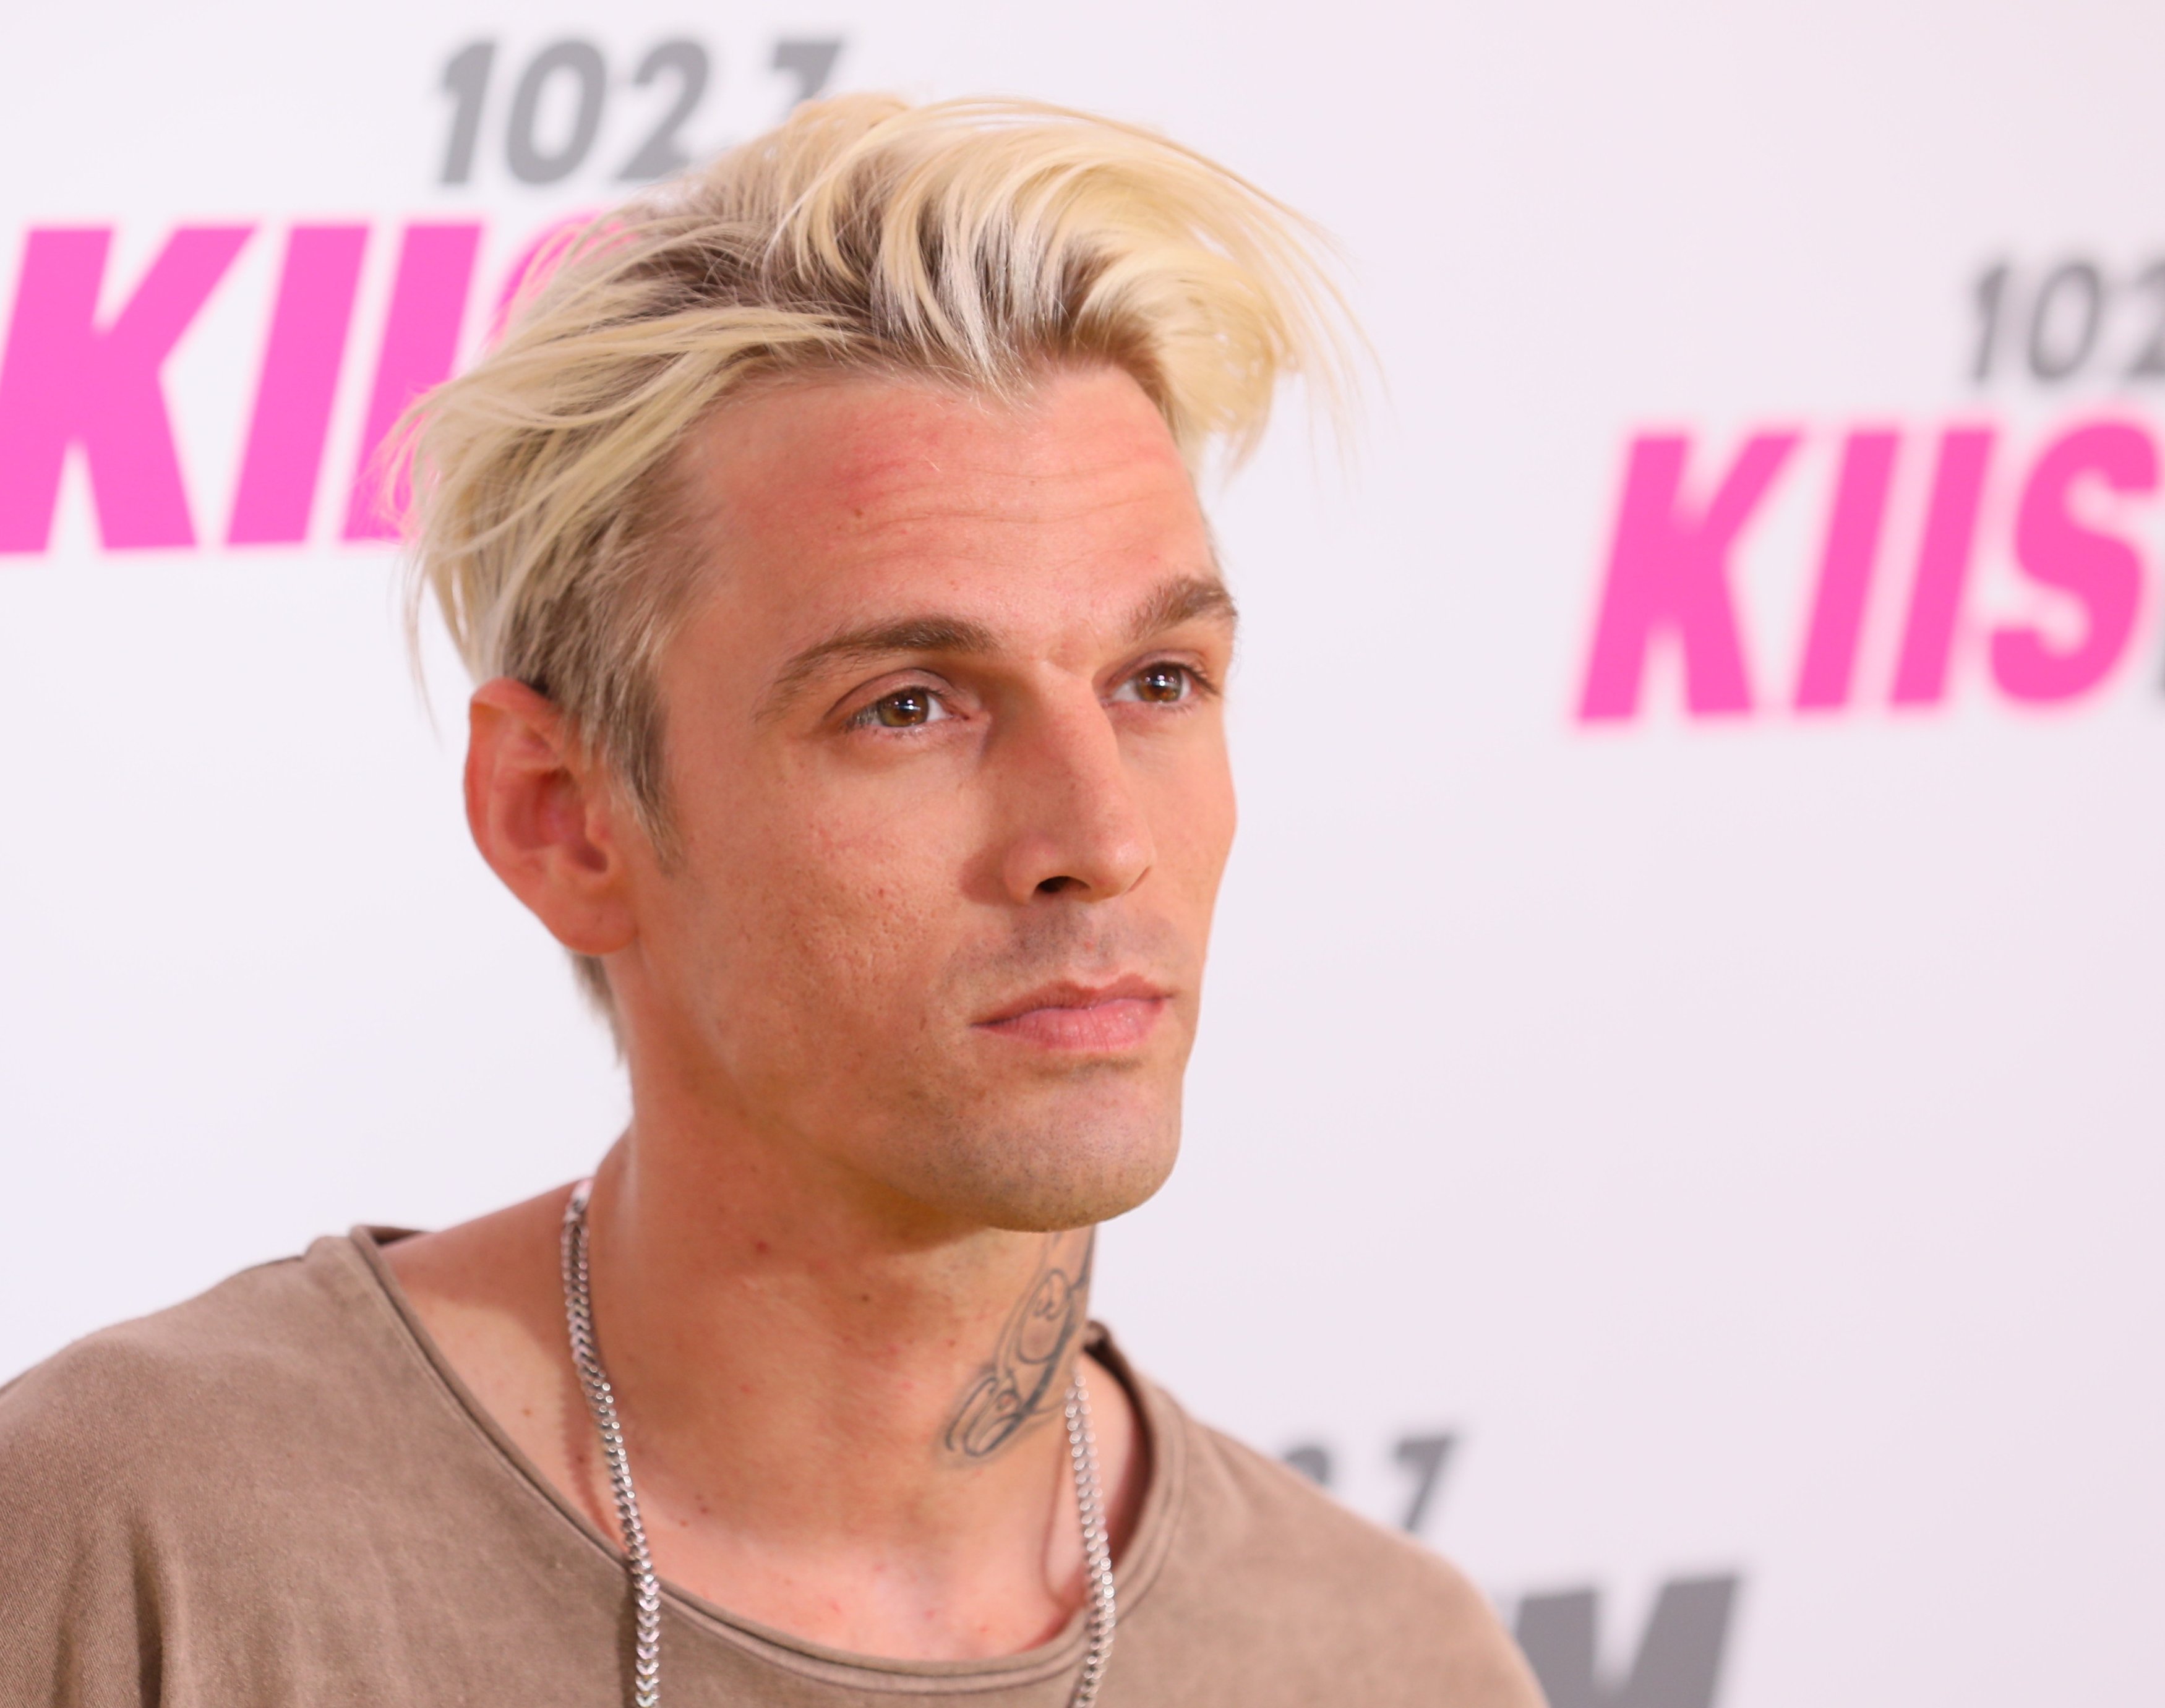 Aaron Carter attends the 102.7 KIIS FM's 2017 Wango Tango on May 13, 2017 in Carson, California. | Source: Getty Images